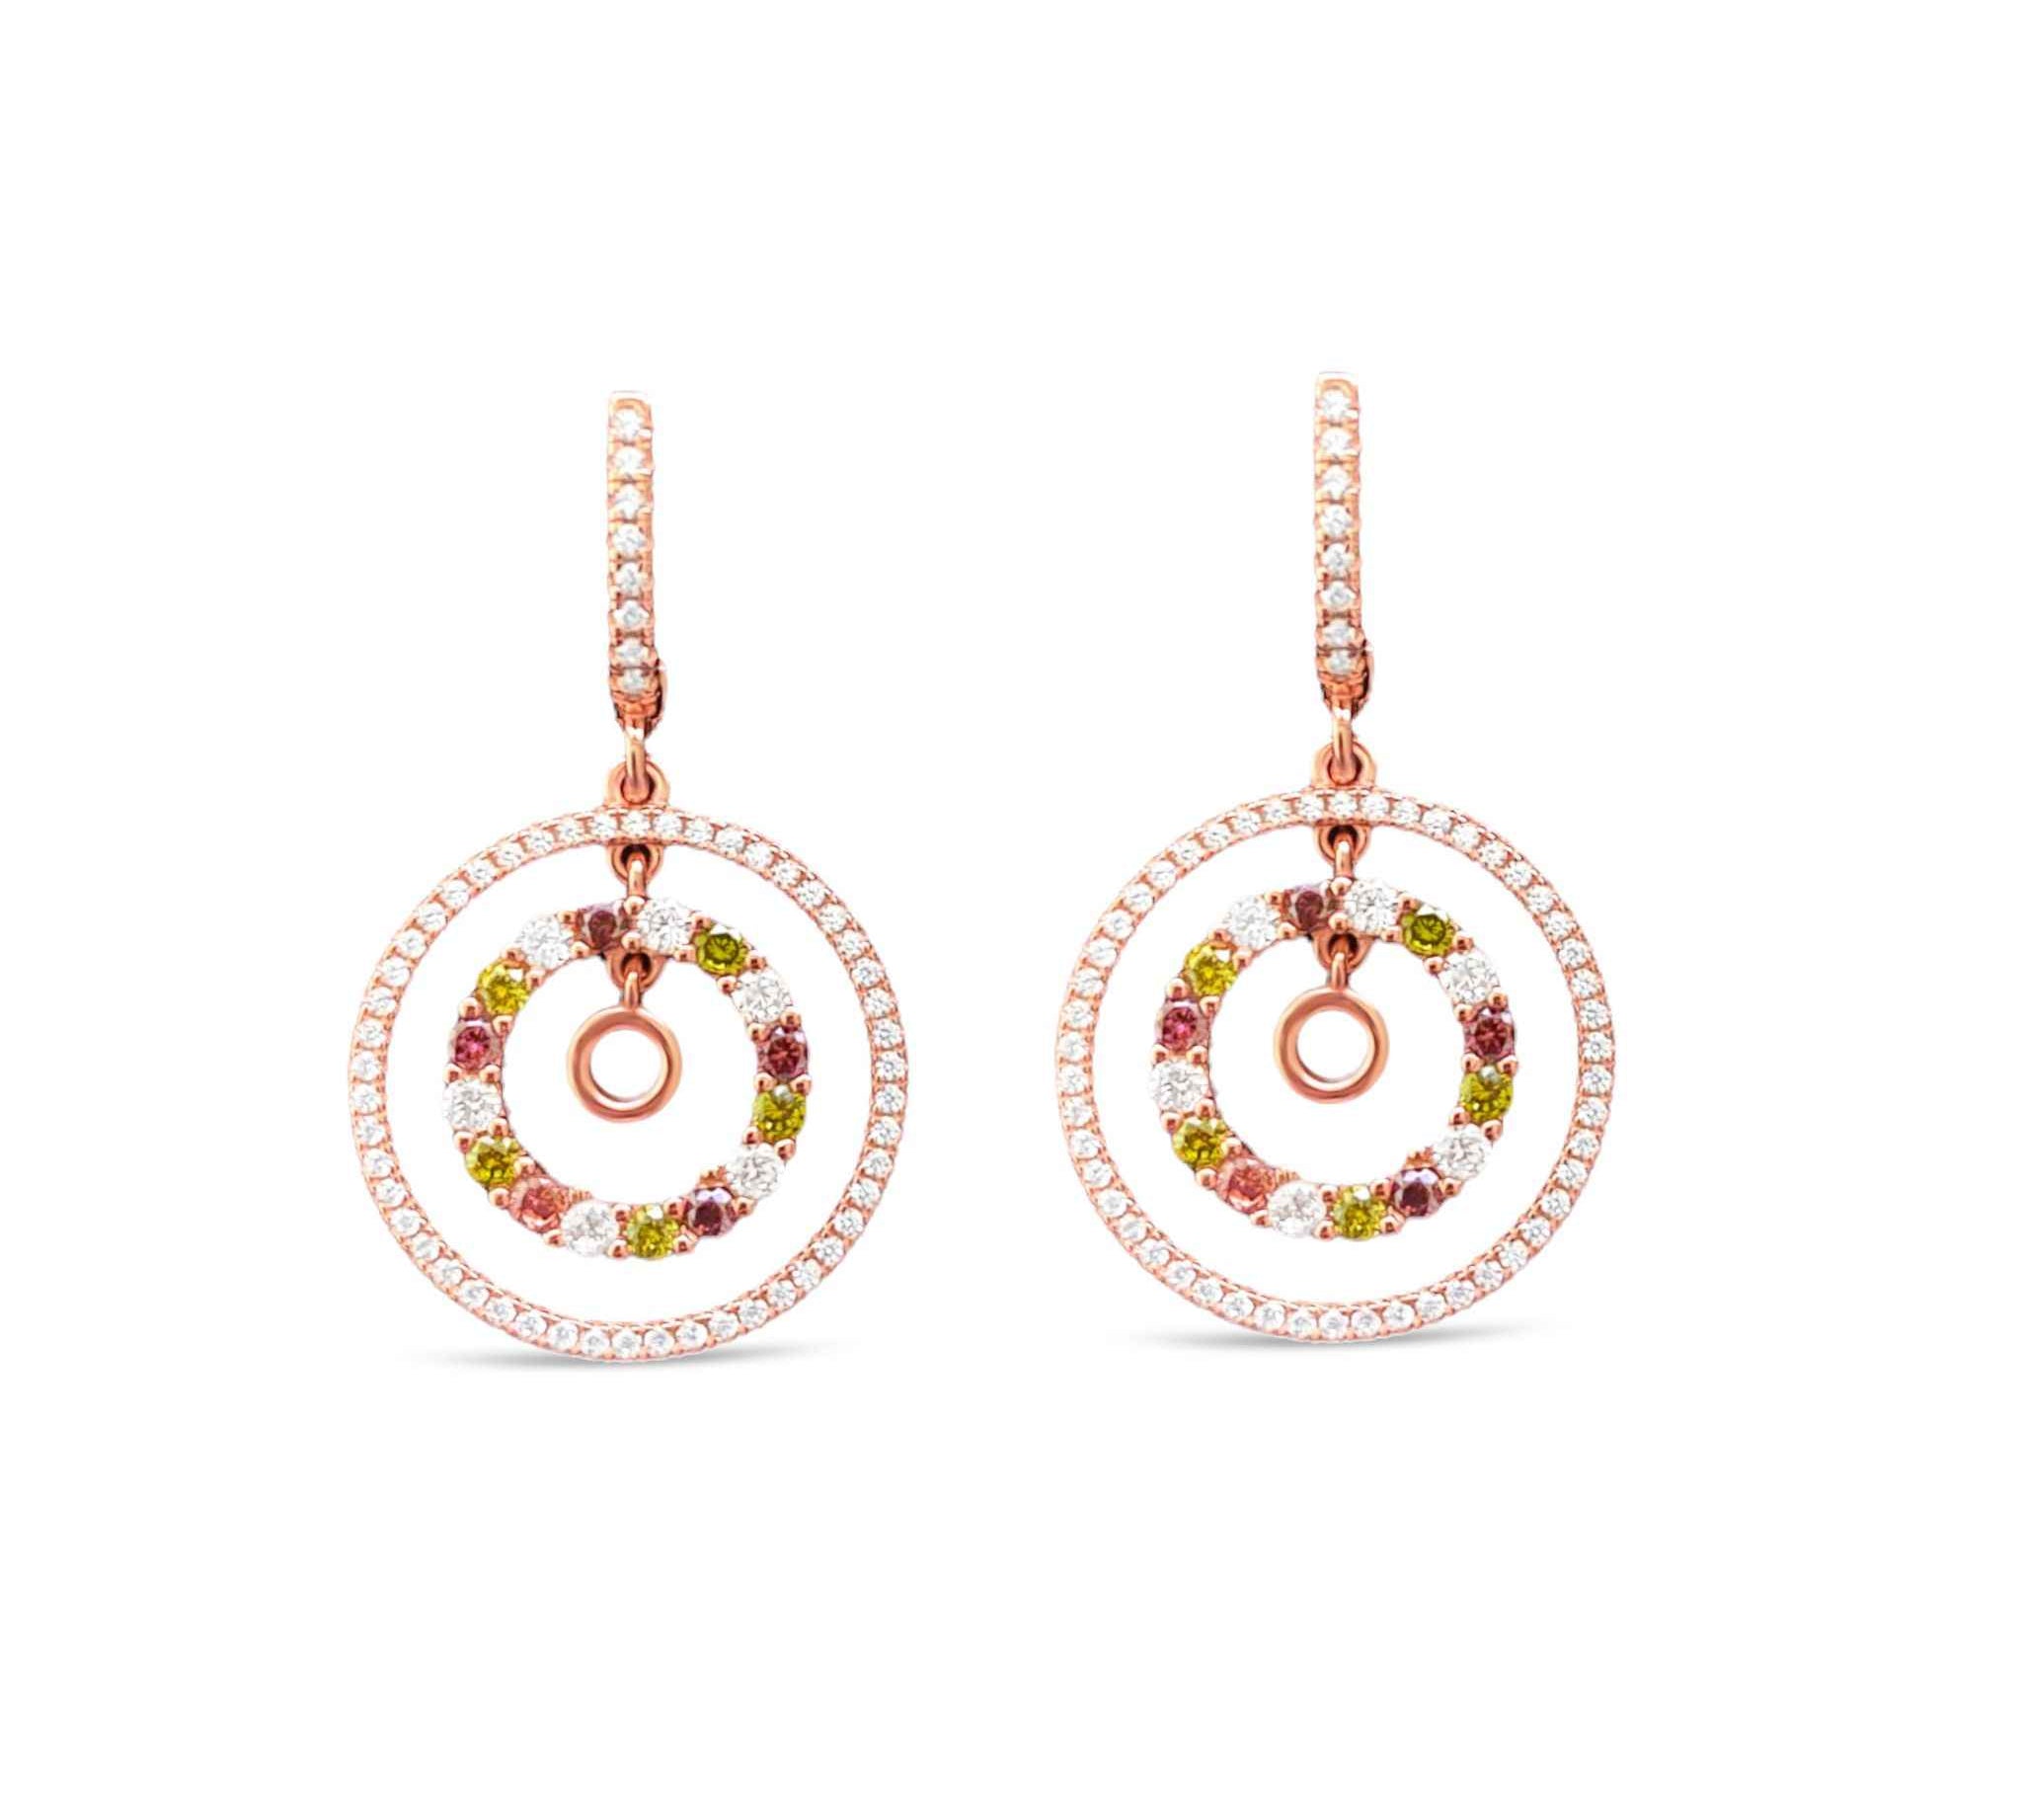 Elegant Halo Drop Earrings with white and deep purple cubic zirconia accents in rose gold finish by Alessandra James.